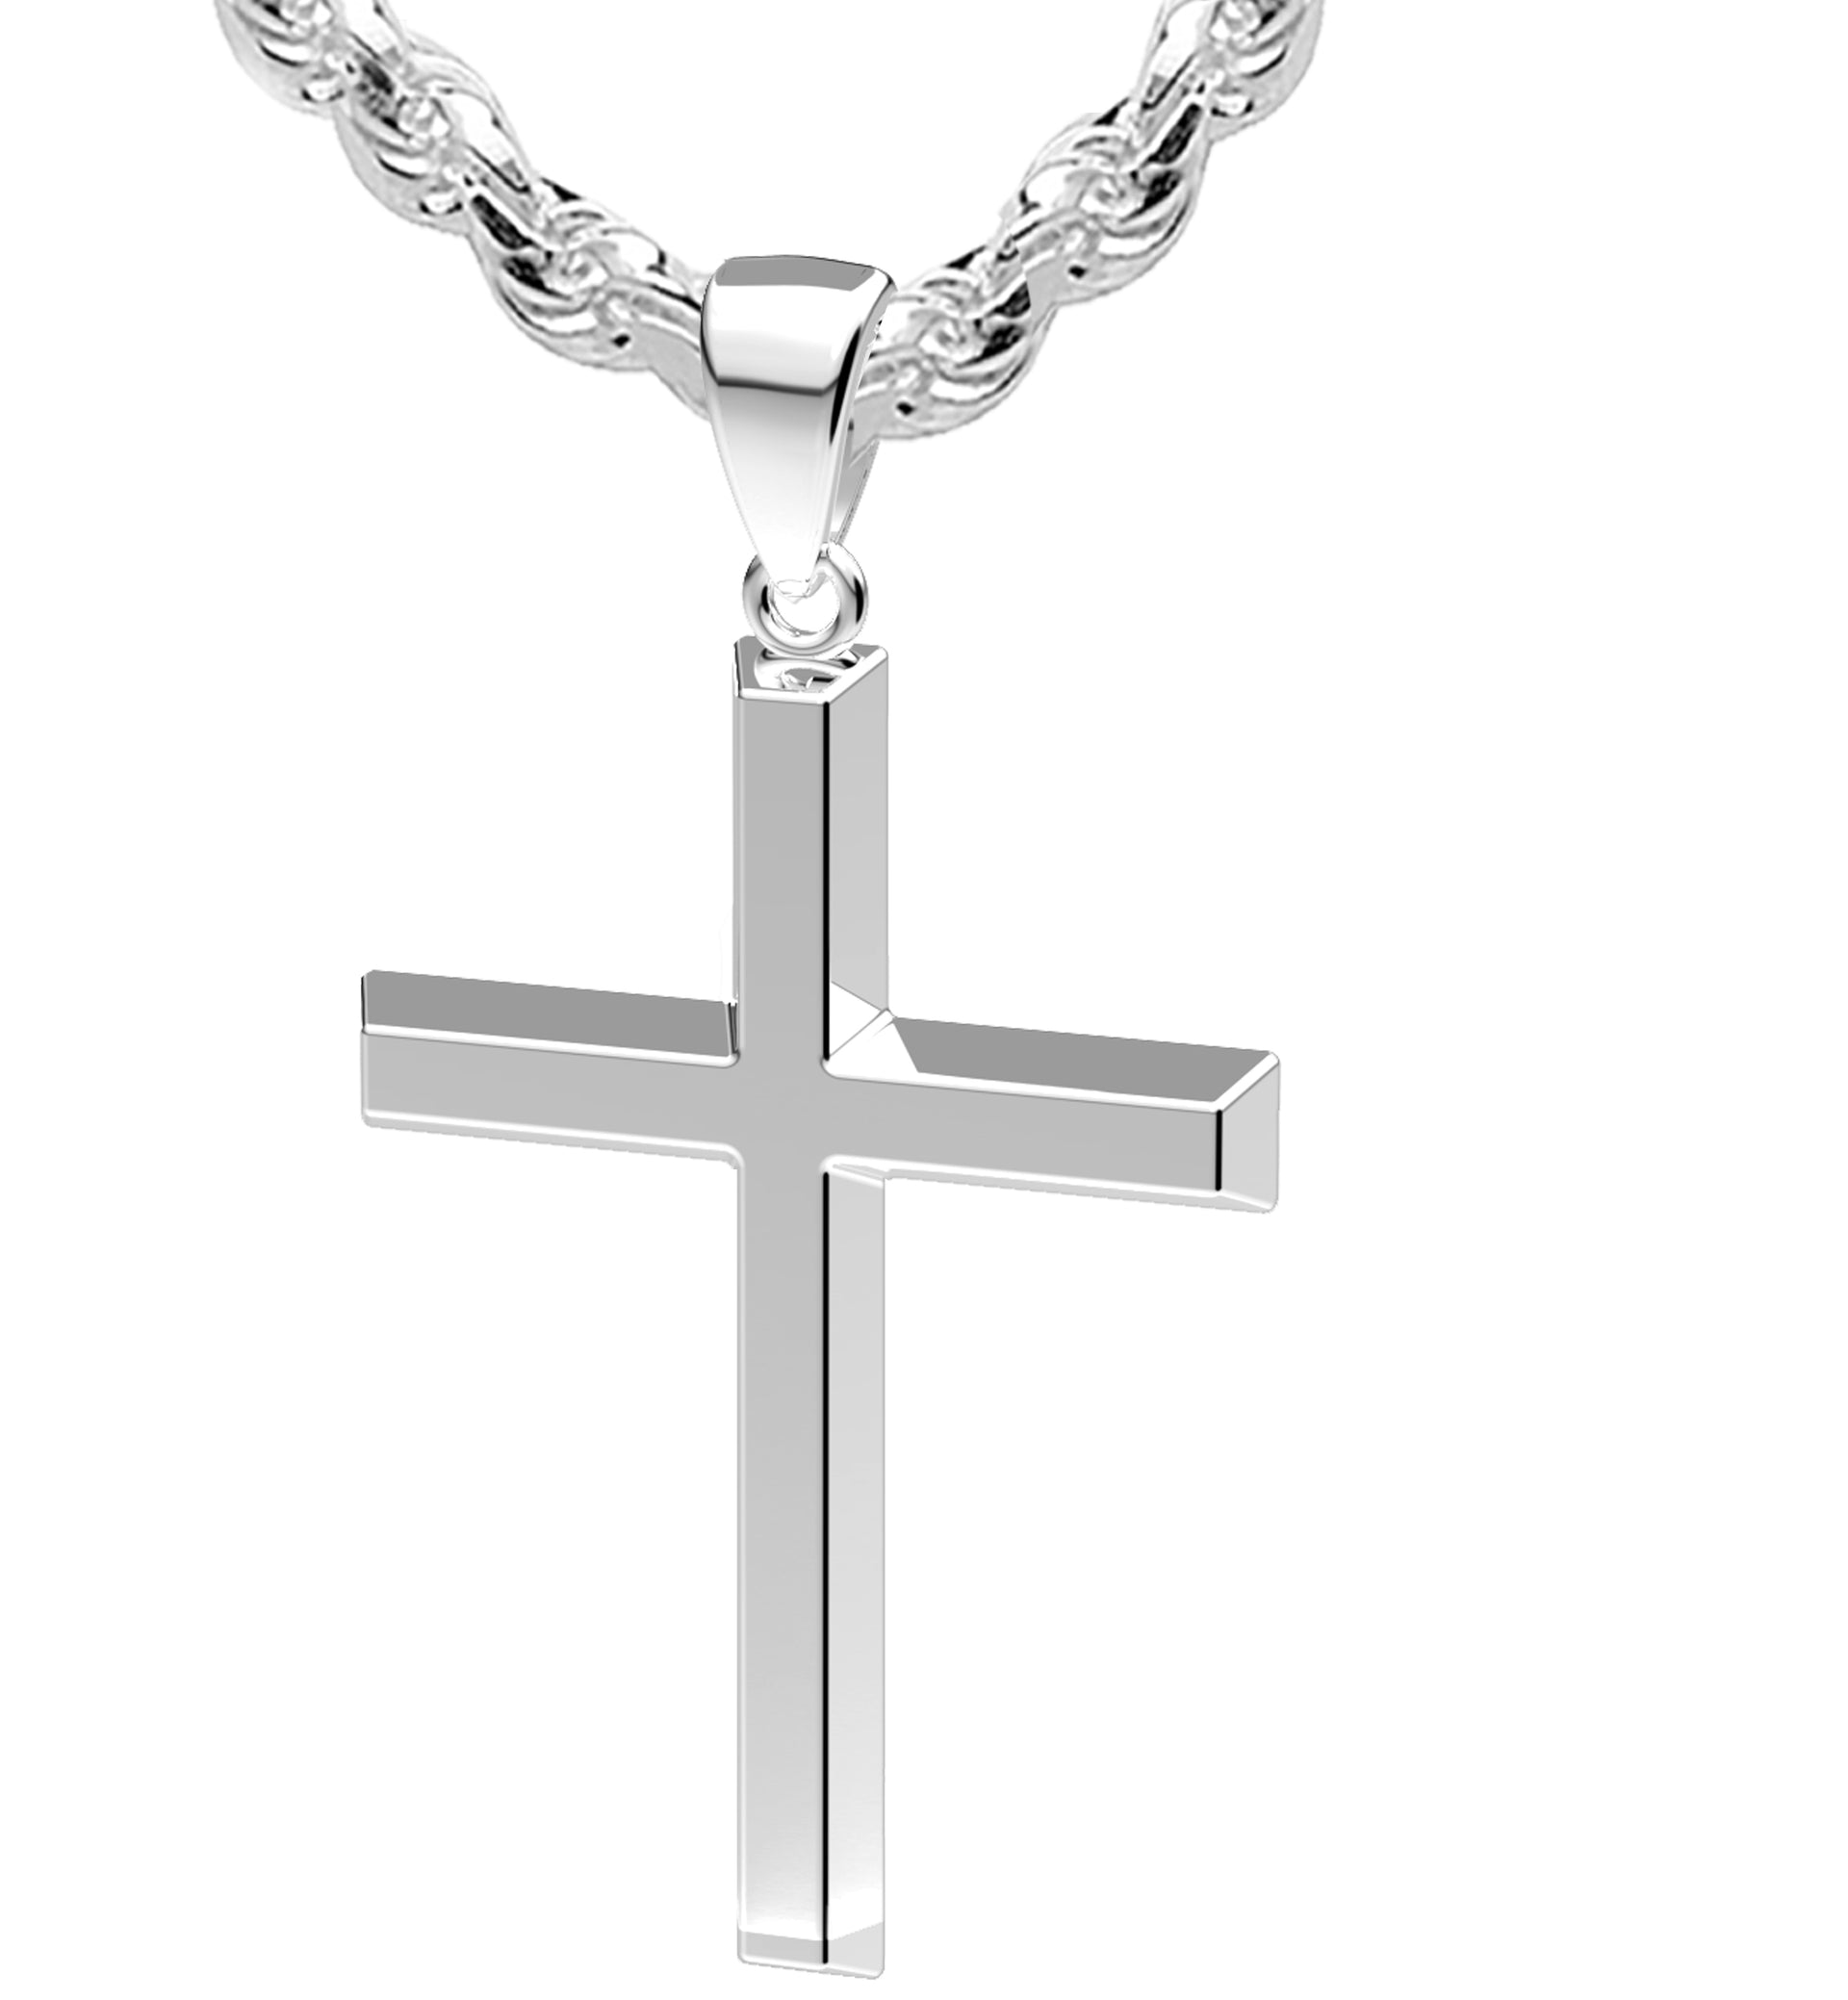 Cross Pendant Necklace - Pendant Necklace Made for Men 26in 3.2mm Rope Chain